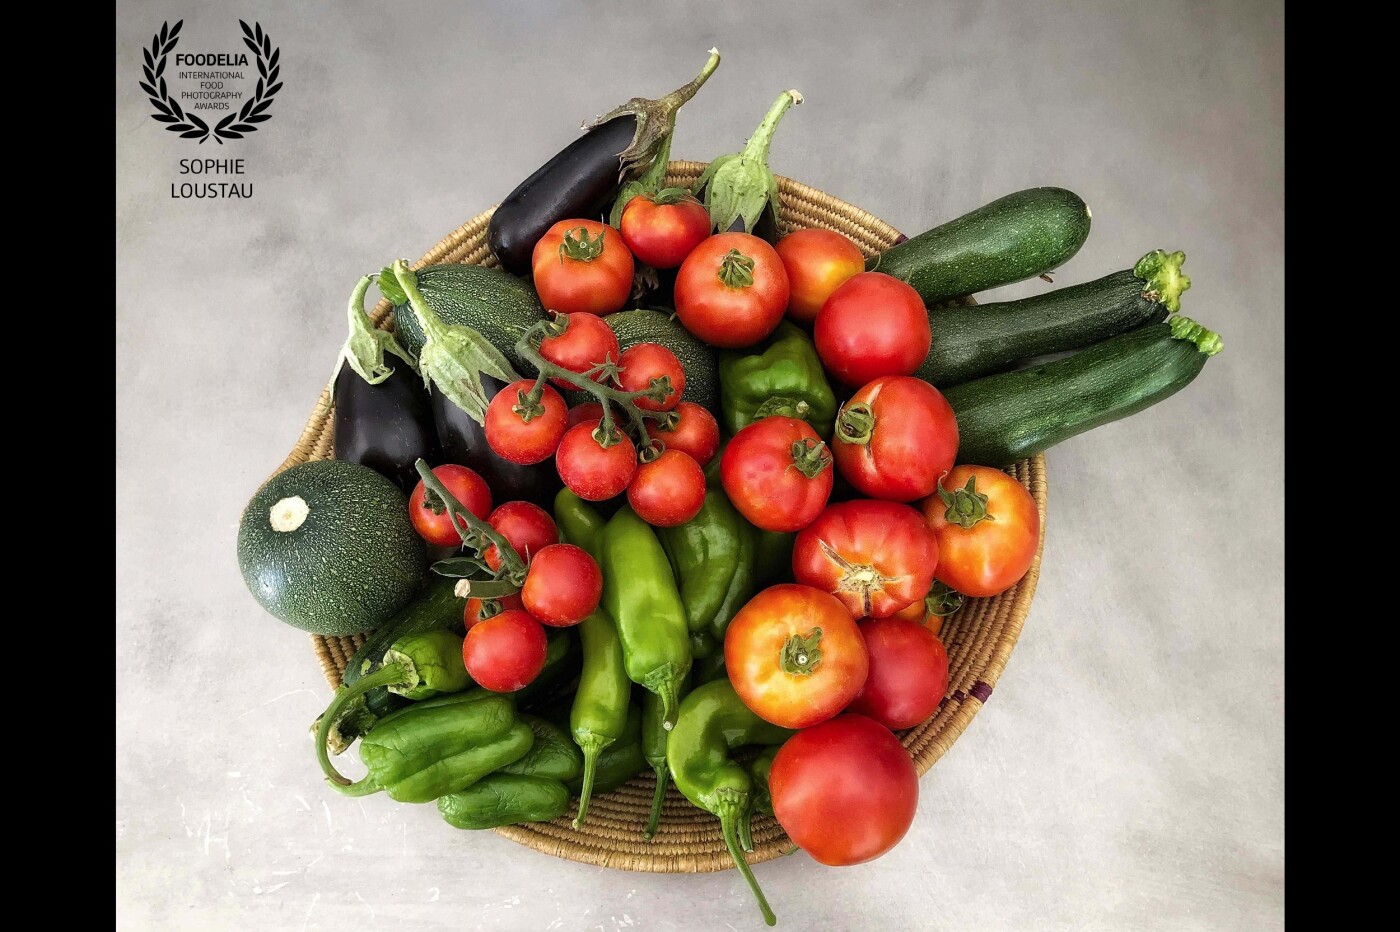 This is a personal work. <br />
A friend’s garden vegetables and fruits.<br />
Organic, good... a better way to appreciate the taste!<br />
Photograph in the natural light.